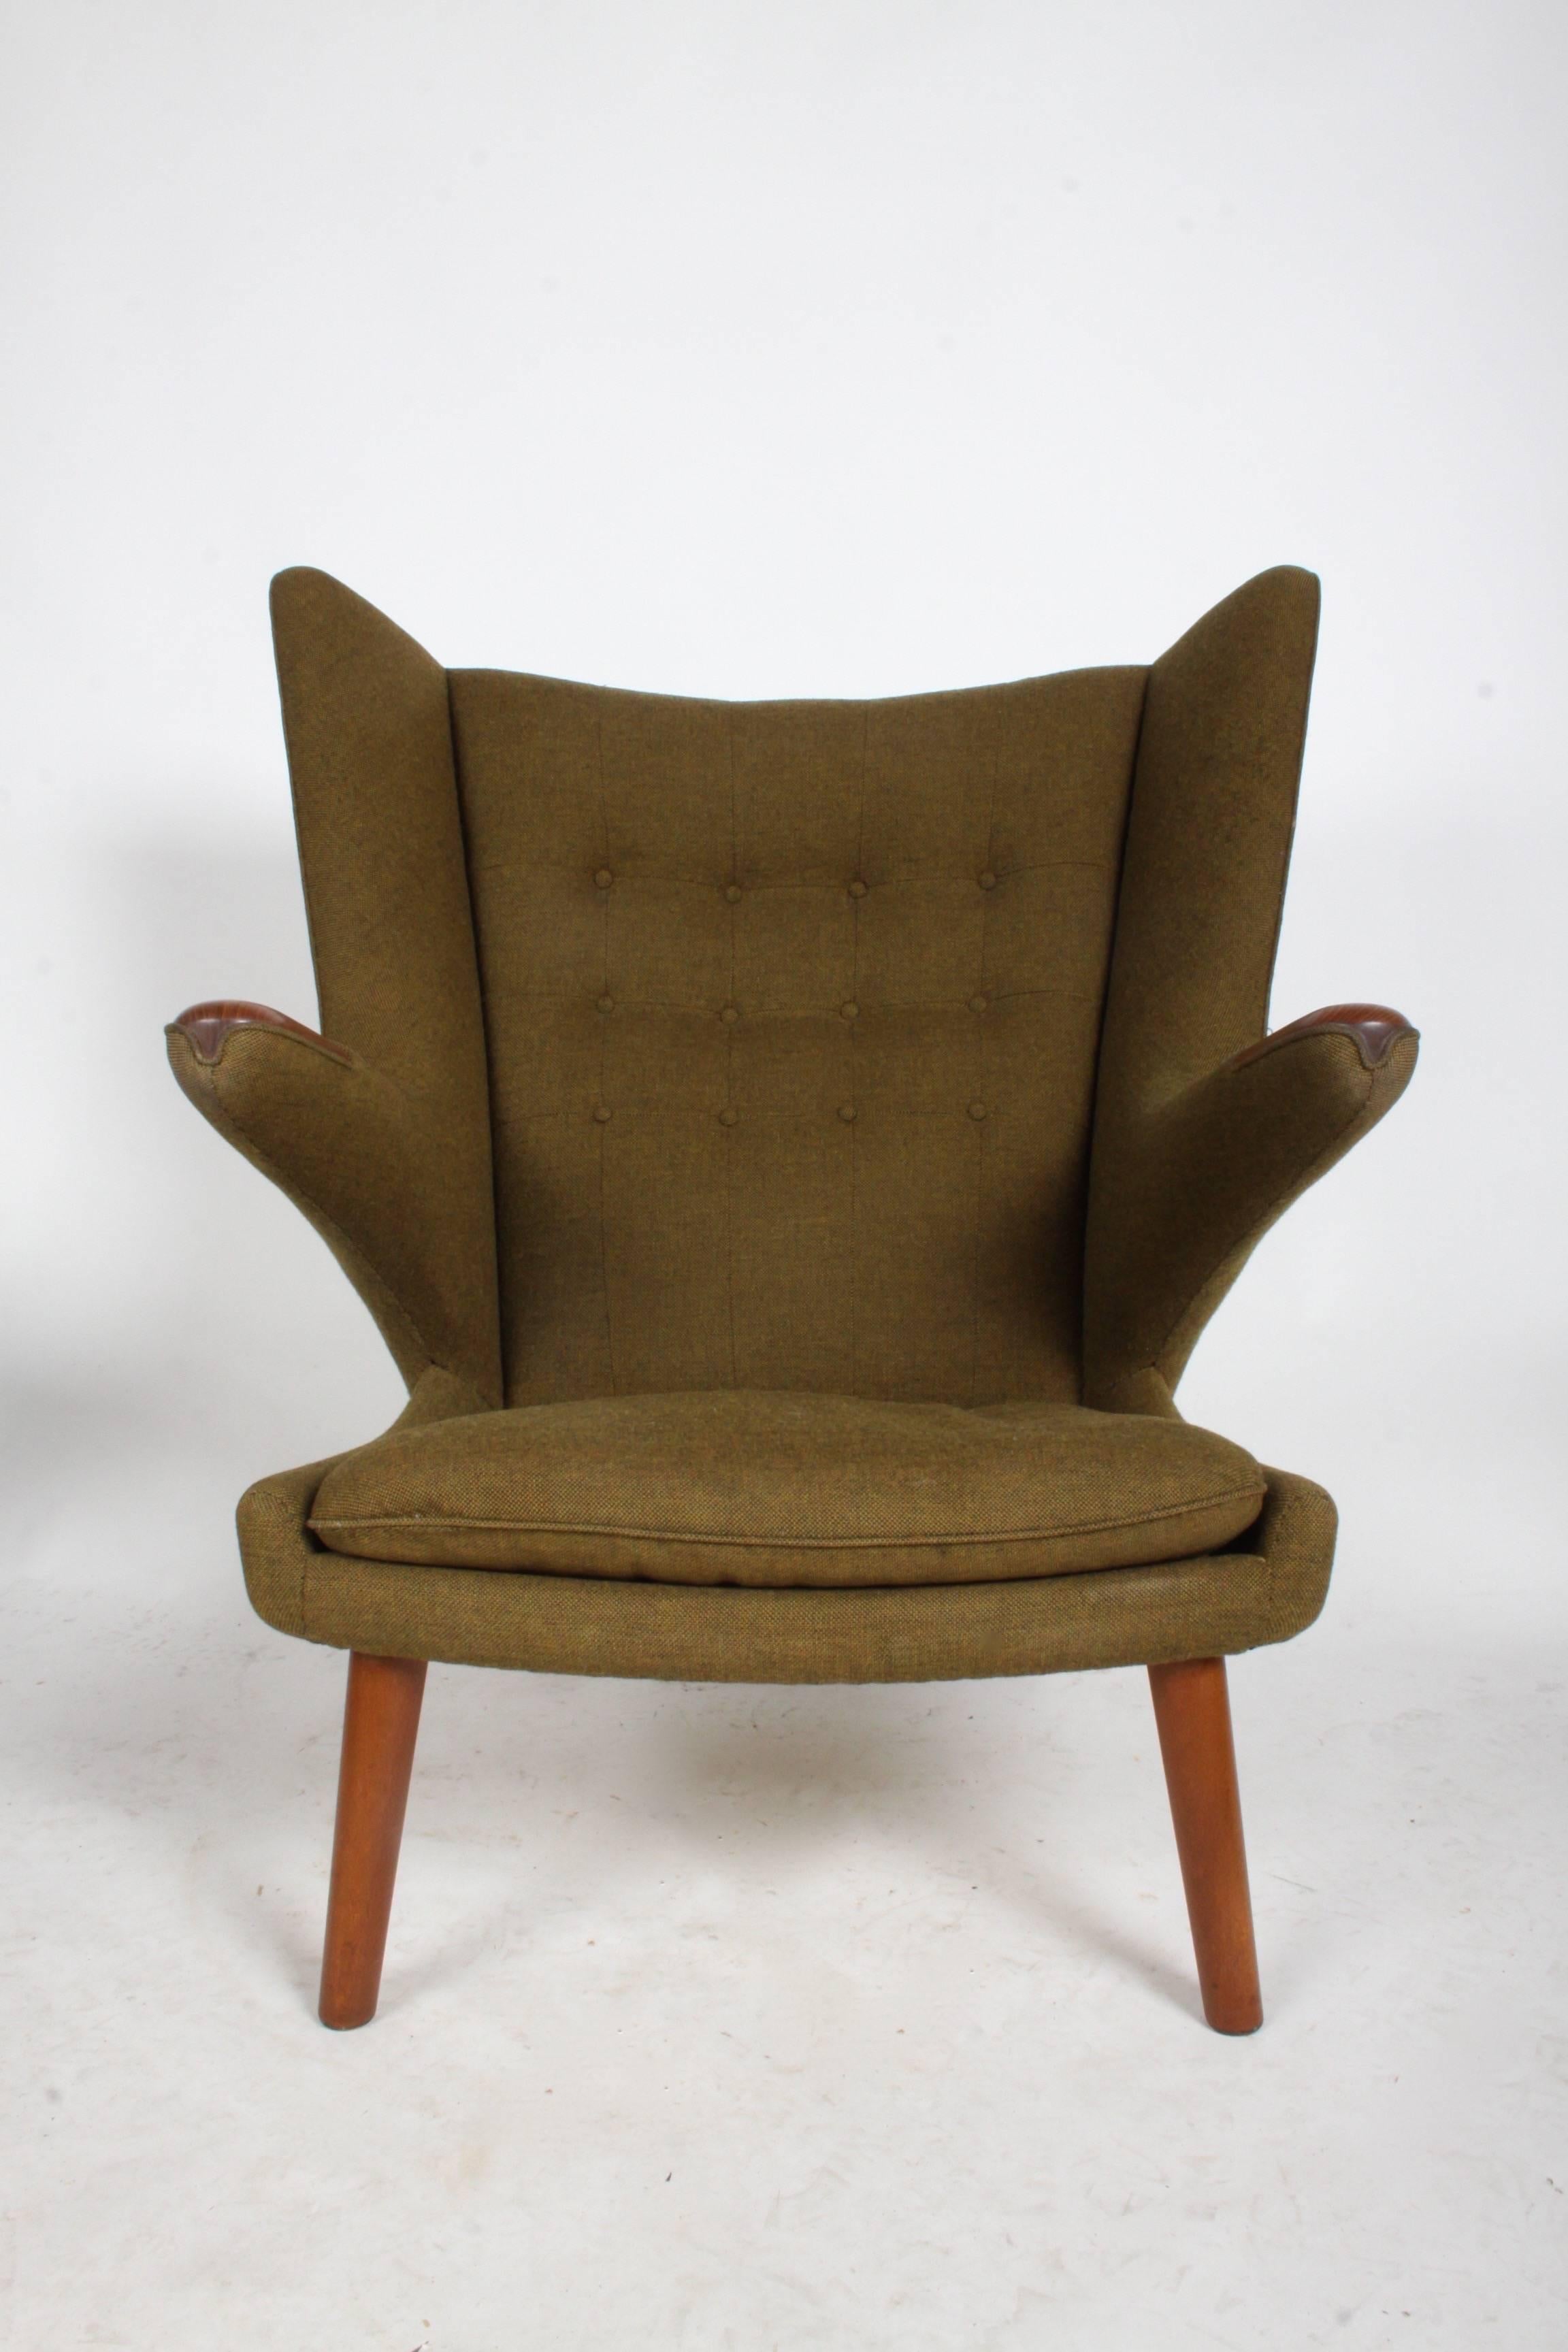 Completely original Hans J. Wegner Papa Bear easy chair by AP Stolen, Denmark. Retains original dark wool upholstery and straps, both in excellent condition! Doesn't need to be reupholstered, unless you want to update upholstery. Even has the